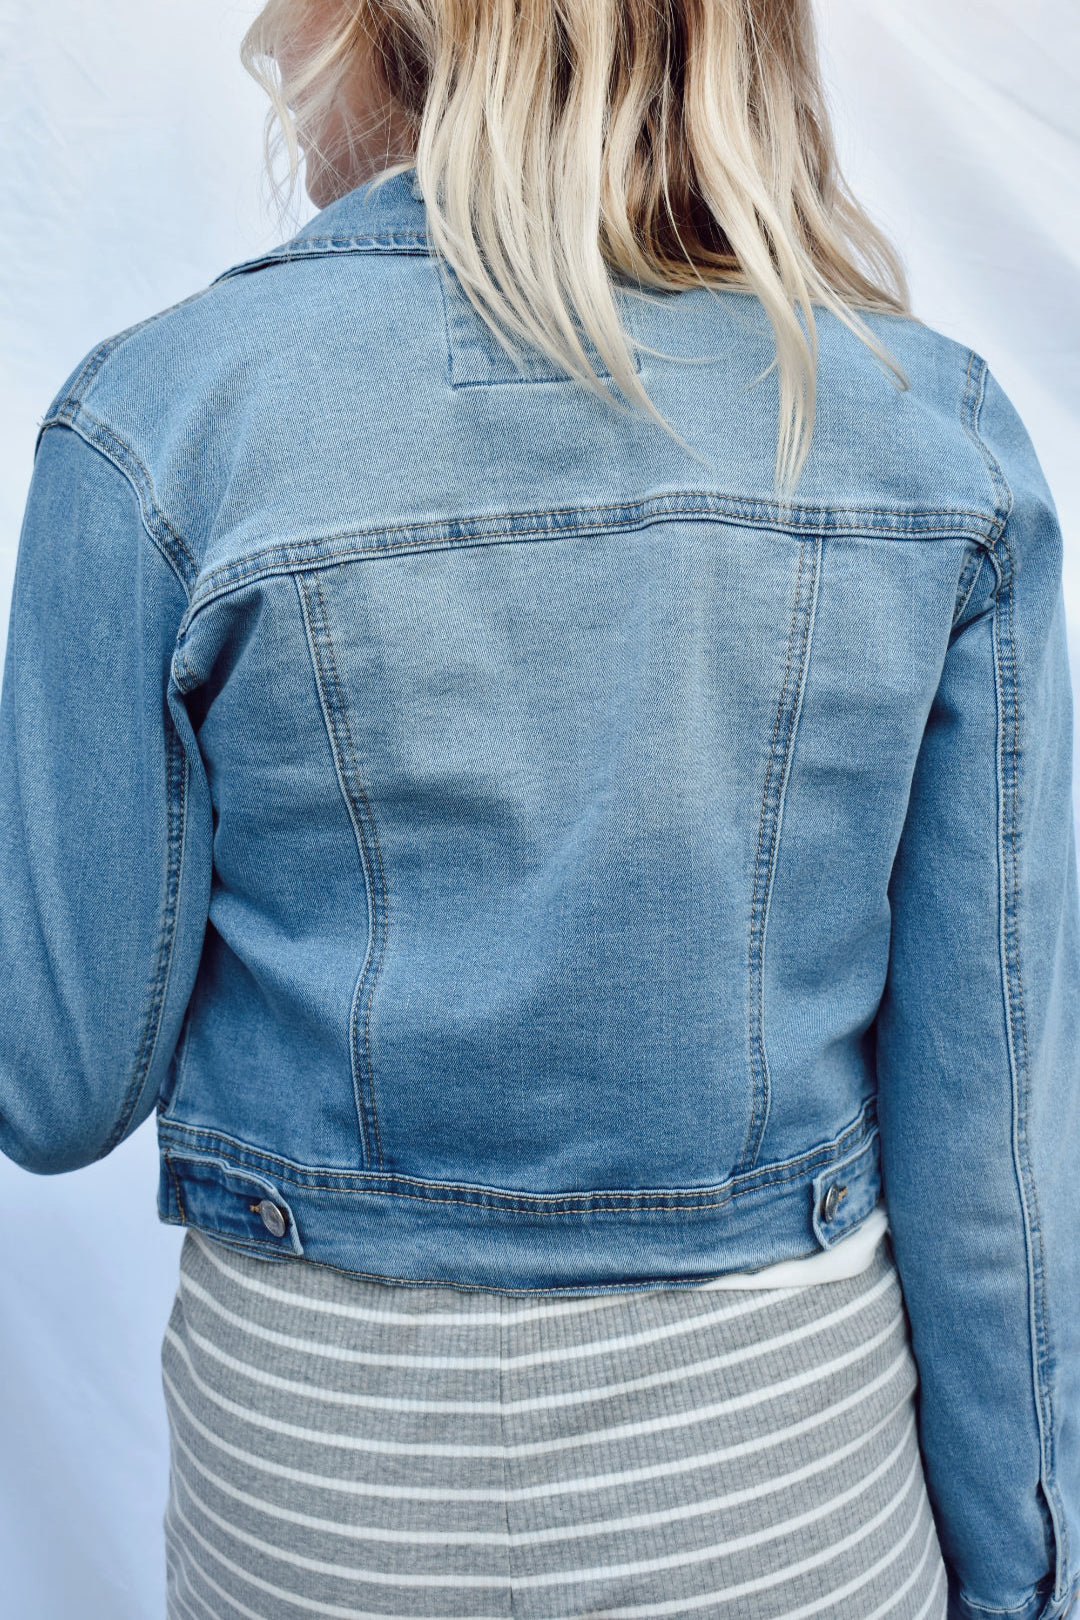 denim cropped jacket with slight distressing light blue 2sable the revival